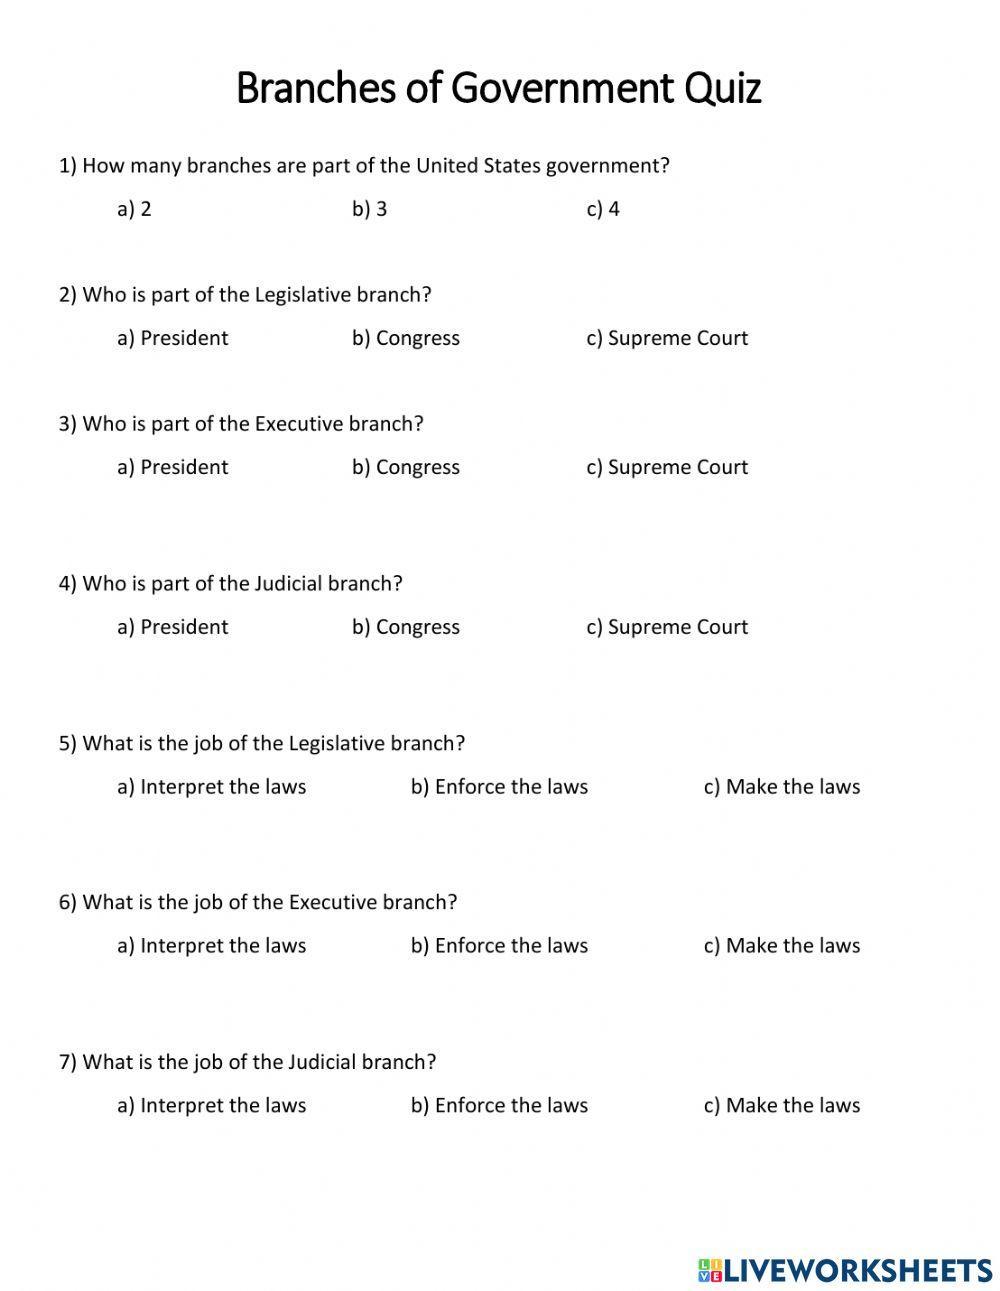 Branches of Government Quiz